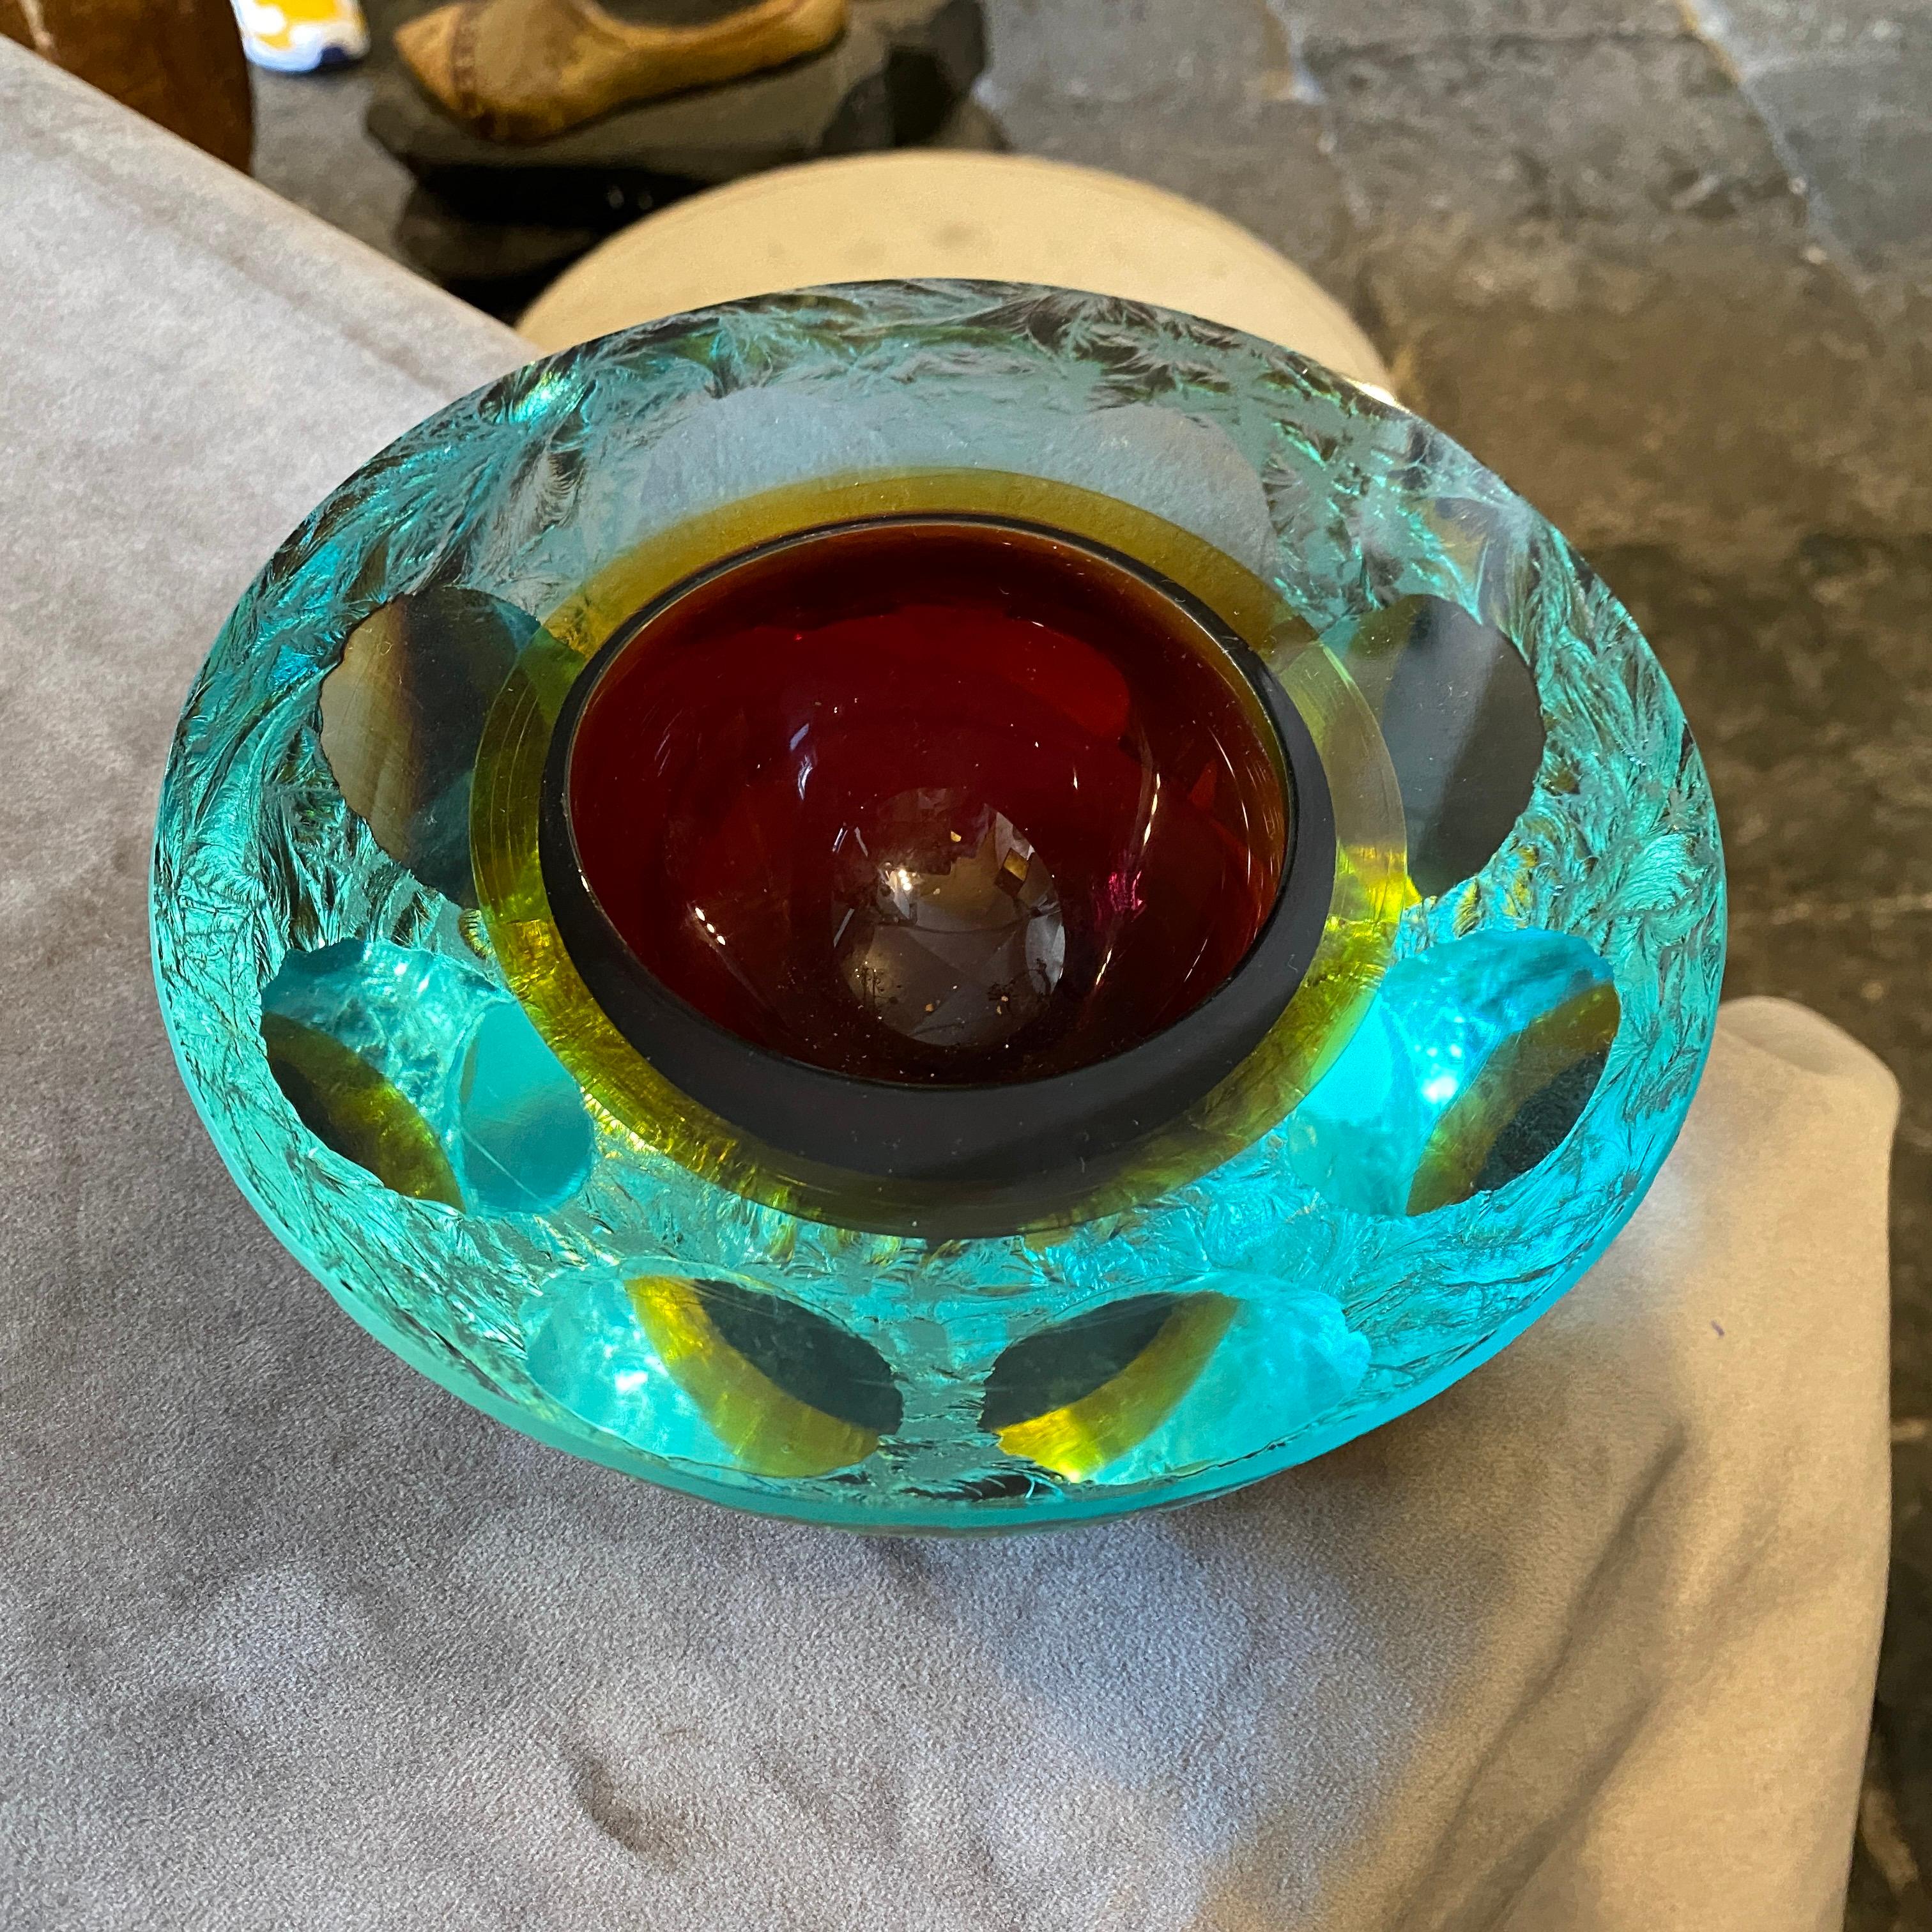 An amazing blue, red and yellow Murano glass bowl. It's a rare one, engraved on the sides, perfect conditions.